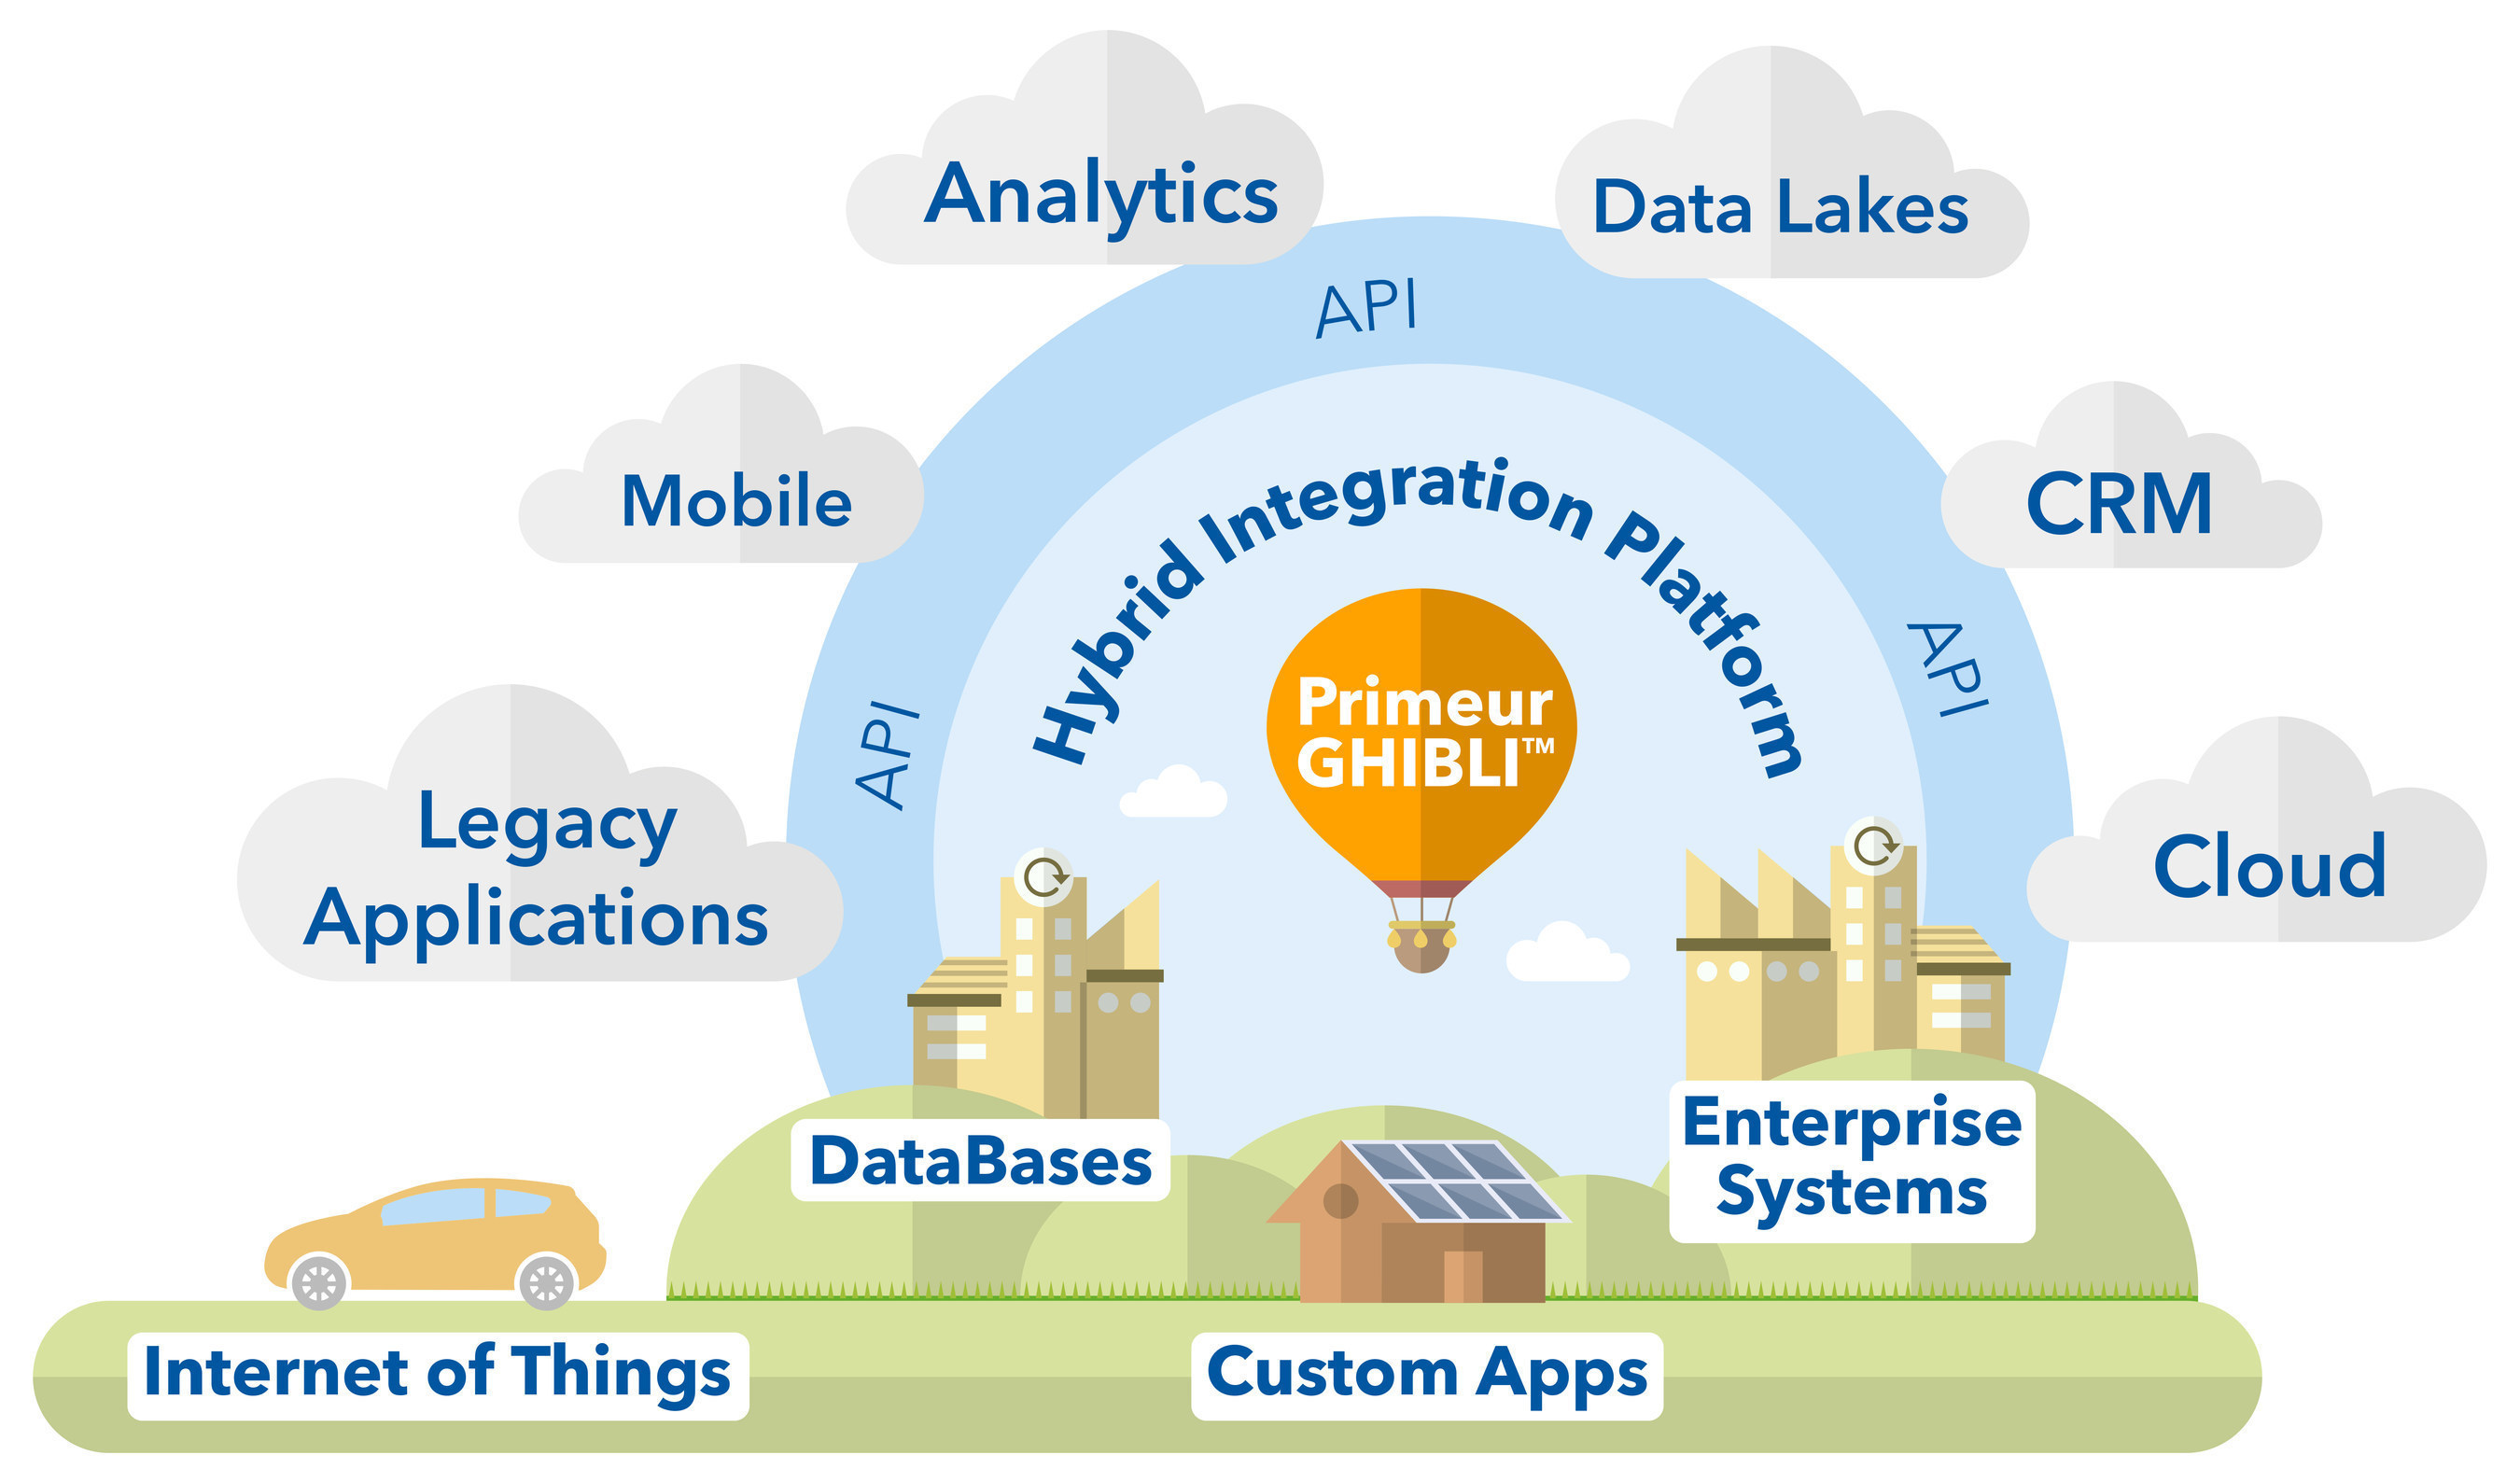 Primeur Ghibli(TM), a new Hybrid Integration Platform released by Primeur, is a framework that allows to integrate data from on-premises systems including ERPs, CRMs, DBs, Custom Apps and other IT systems and from systems distributed outside the company, adapting to Clients existing infrastructure, applications and business processes. 
Primeur Ghibli(TM) is a flexible technology solution that operates asynchronously with full end-to-end governance capabilities. (PRNewsFoto/PRIMEUR Group)